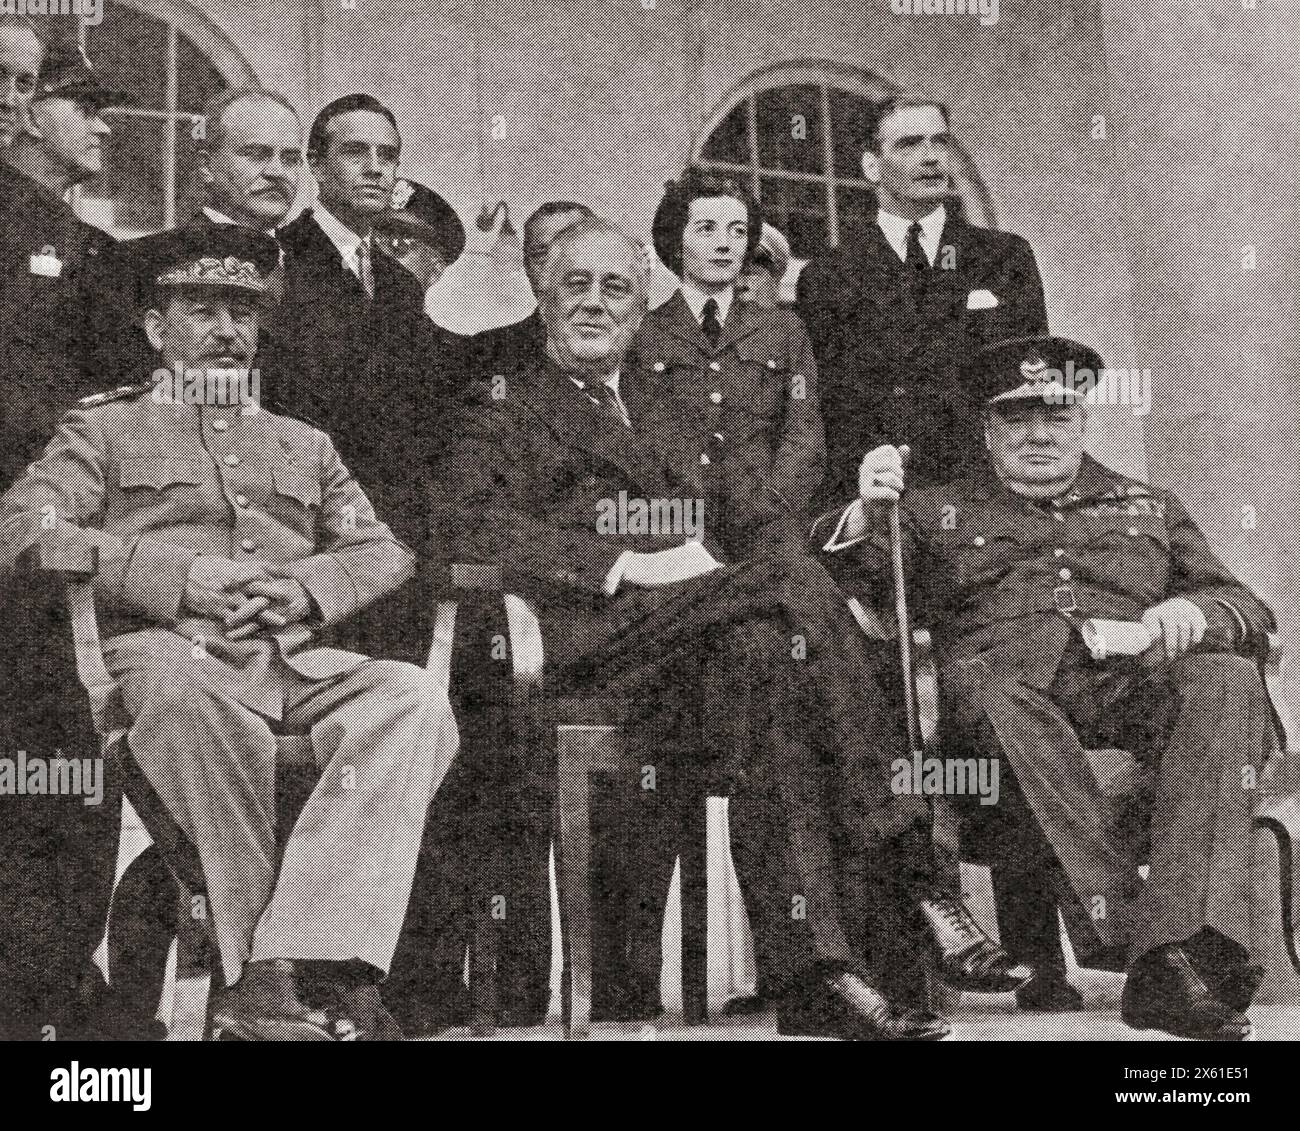 Stalin, Roosevelt and Churchill at the Teheran Conference, 1943. Sir Winston Leonard Spencer-Churchill, 1874 –1965. British politician, statesman, army officer, and writer, who was Prime Minister of the United Kingdom from 1940 to 1945 and again from 1951 to 1955.  Joseph Vissarionovich Dzhugashvili Stalin, 1878 –1953. Soviet communist revolutionary and politician. Franklin Delano Roosevelt, 1882 – 1945, aka FDR.  American statesman, political leader and 32nd president of the United States.  From The War in Pictures, Fifth Year. Stock Photo